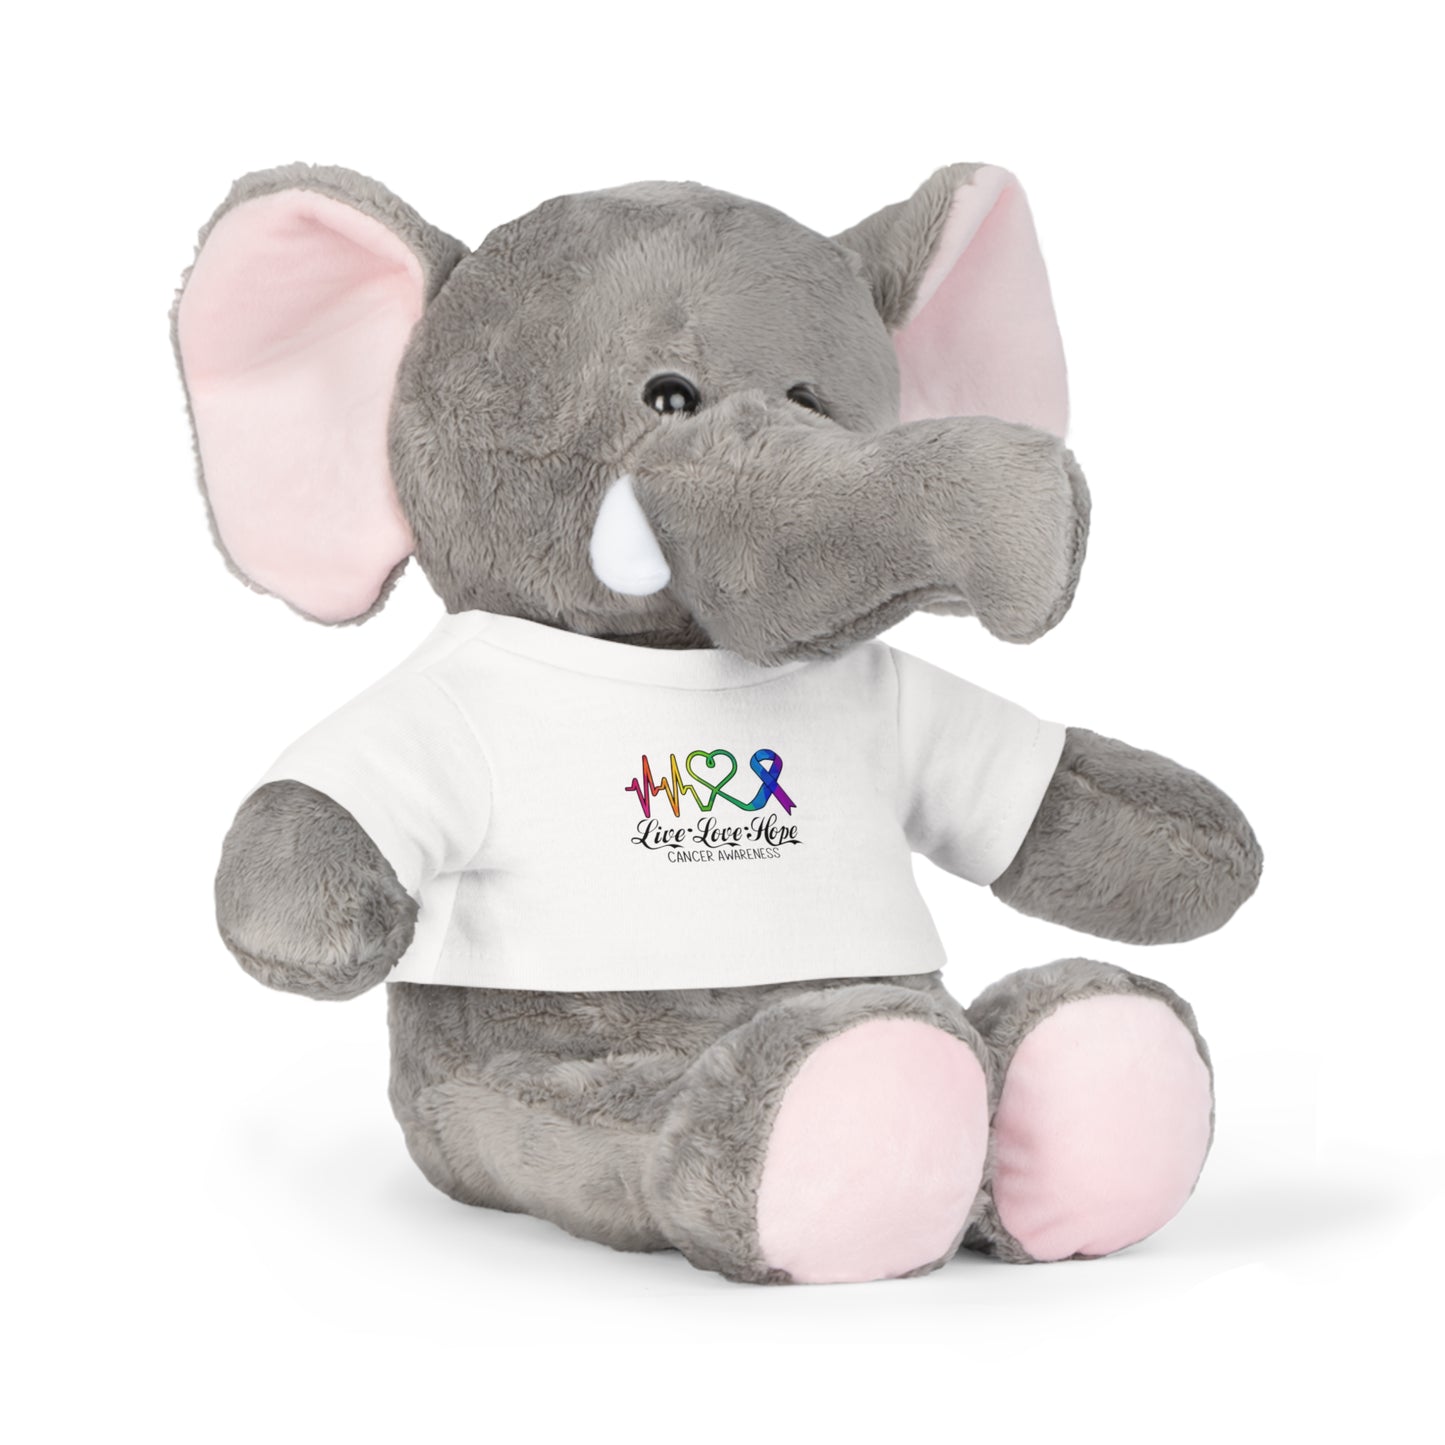 Cancer Awareness, Plush Toy with T-Shirt